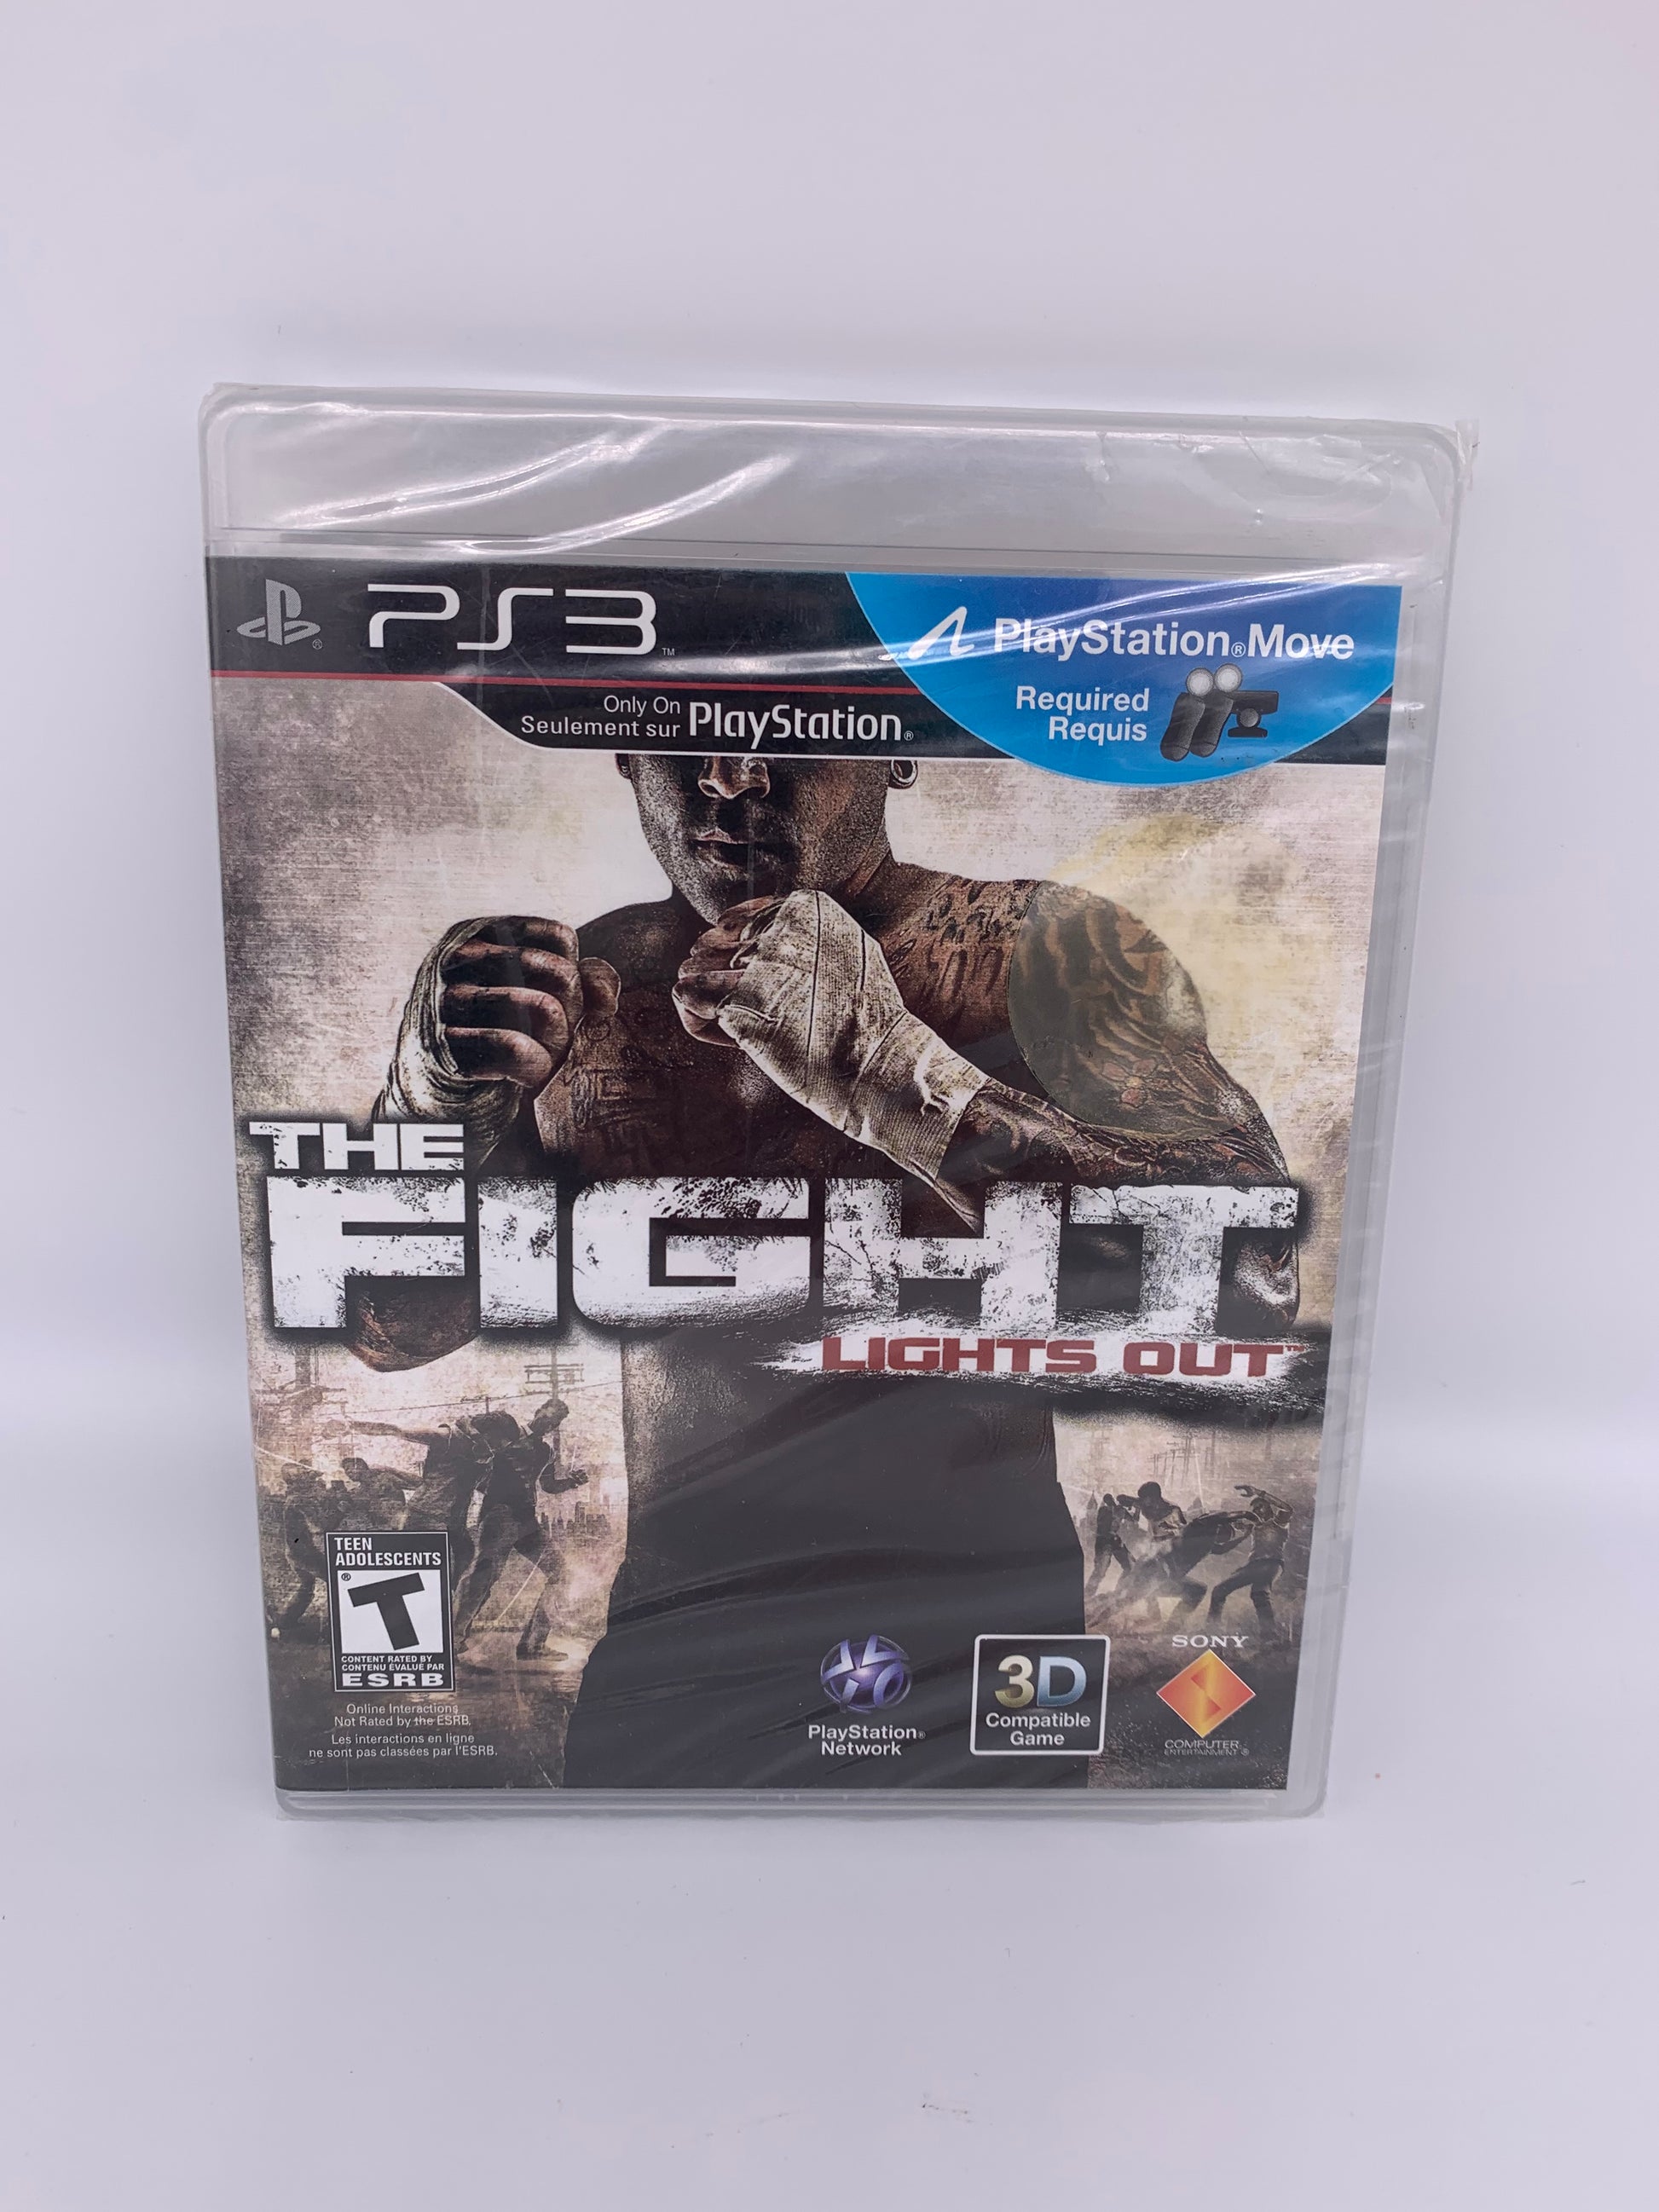 PiXEL-RETRO.COM : SONY PLAYSTATION 3 (PS3) COMPLETE IN BOX CIB MANUAL GAME NTSC THE FIGHT LIGHTS OUT NEW SEALED